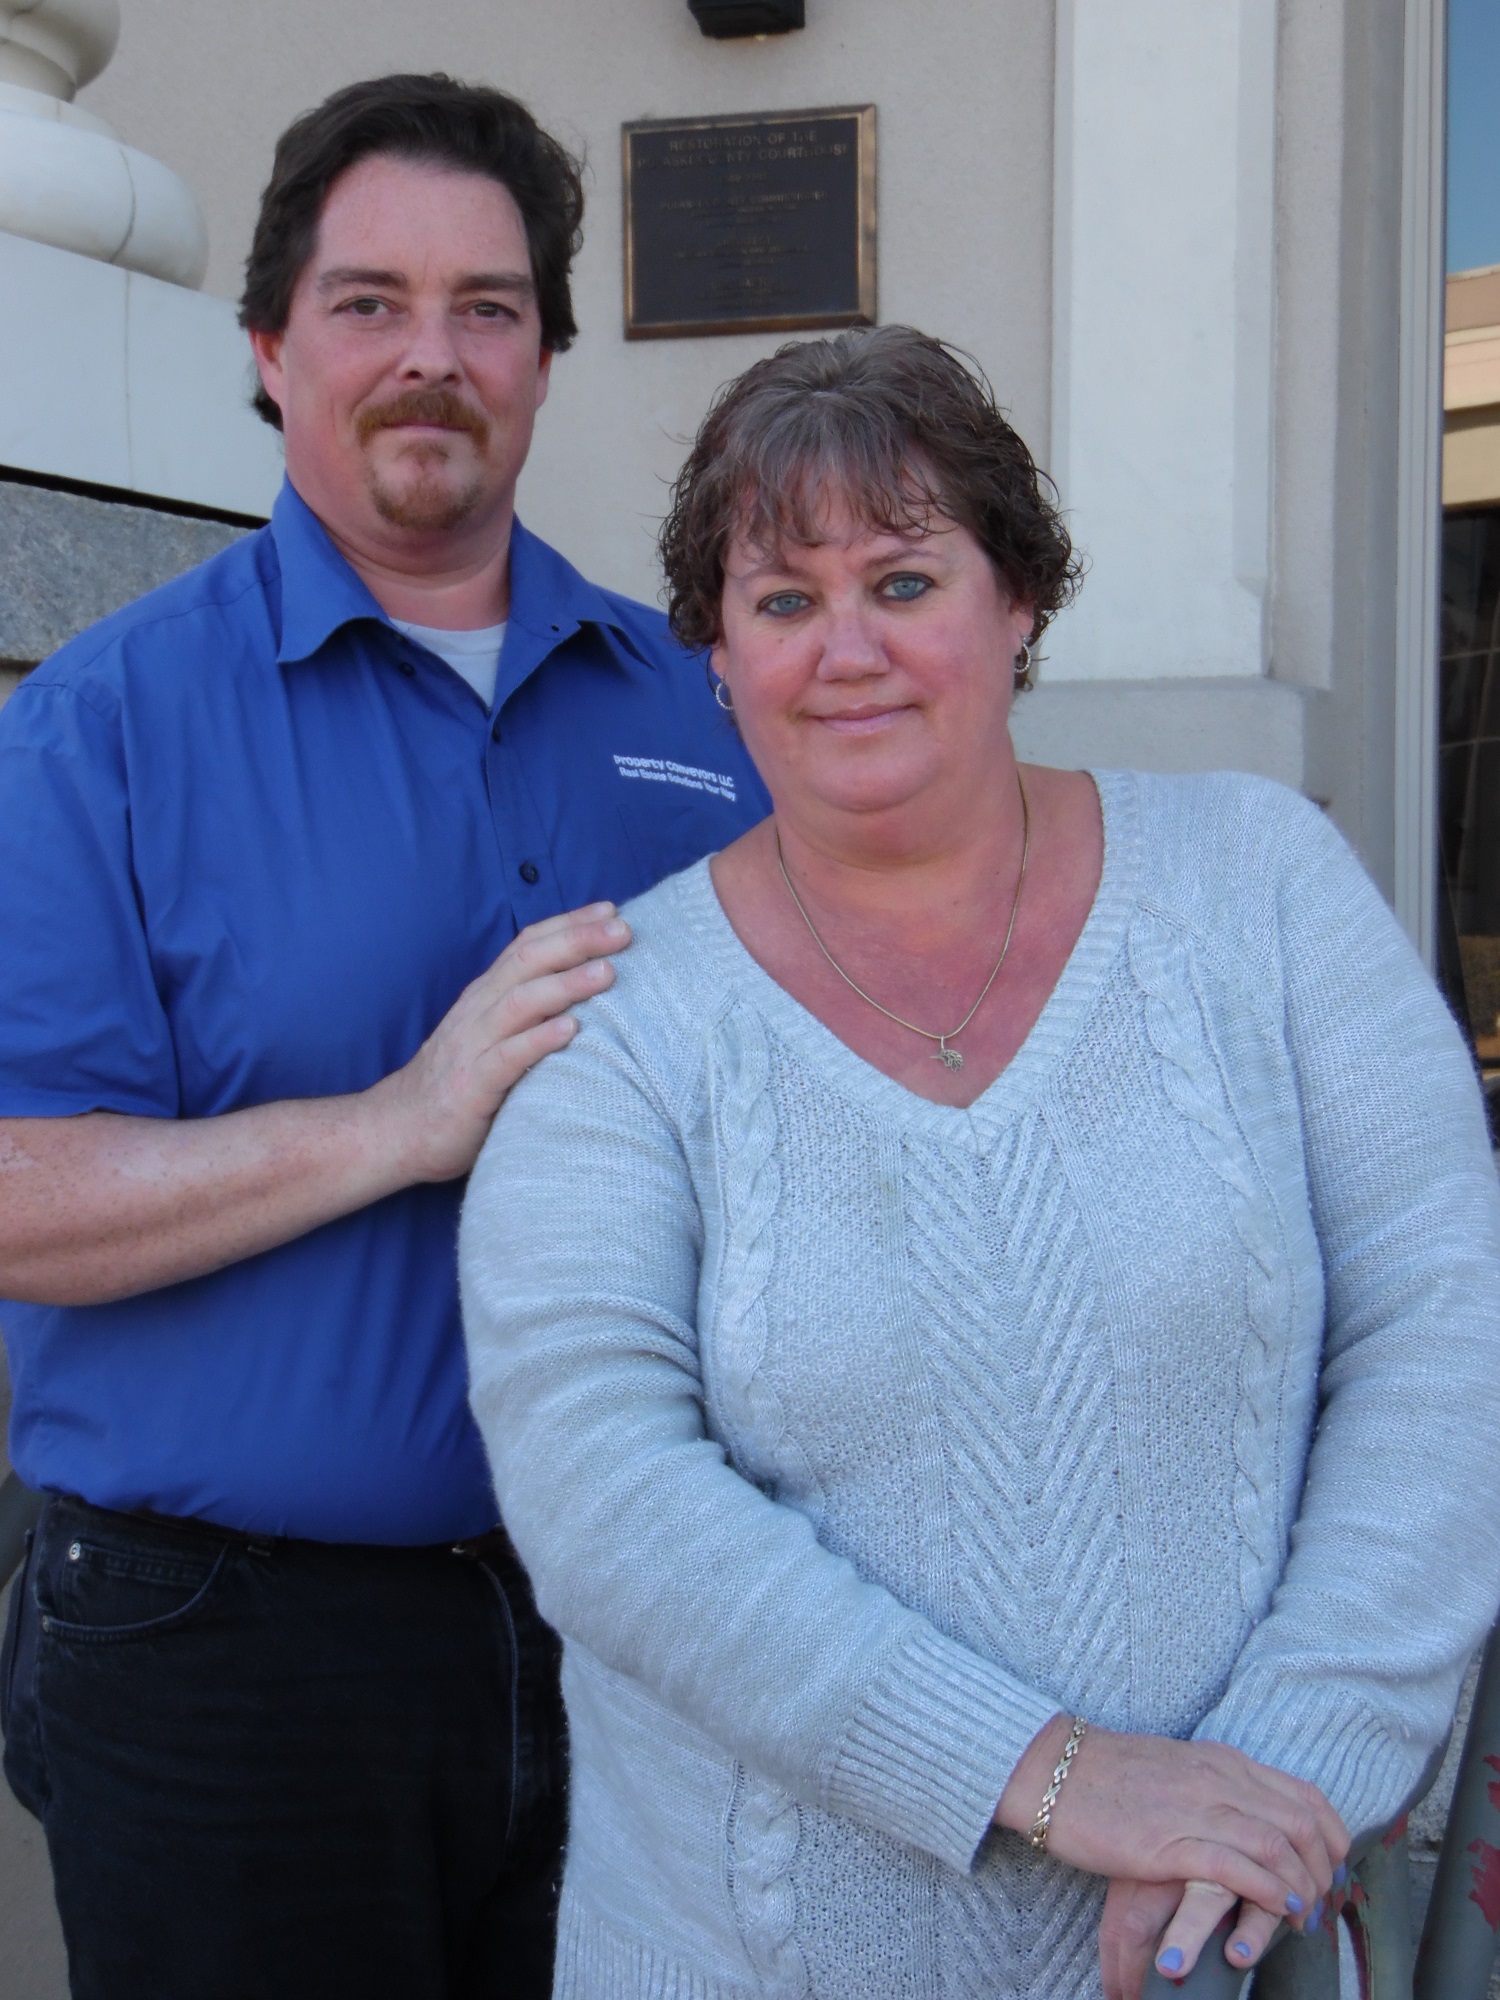 Warner robins Property managers